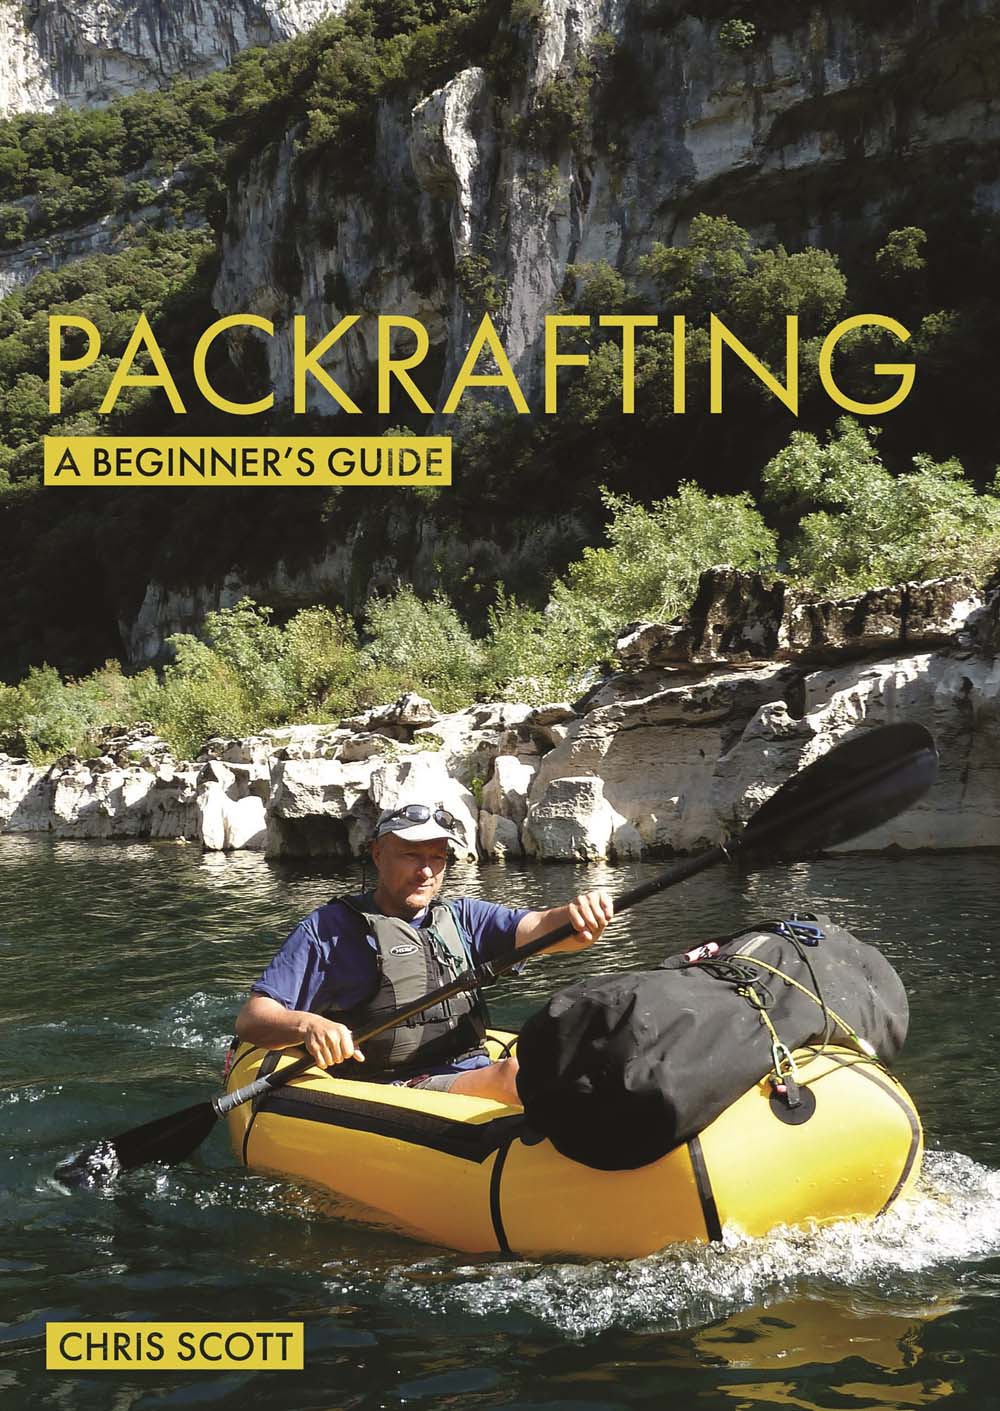 A guide for beginners that want to learn about packrafting a cover of the book